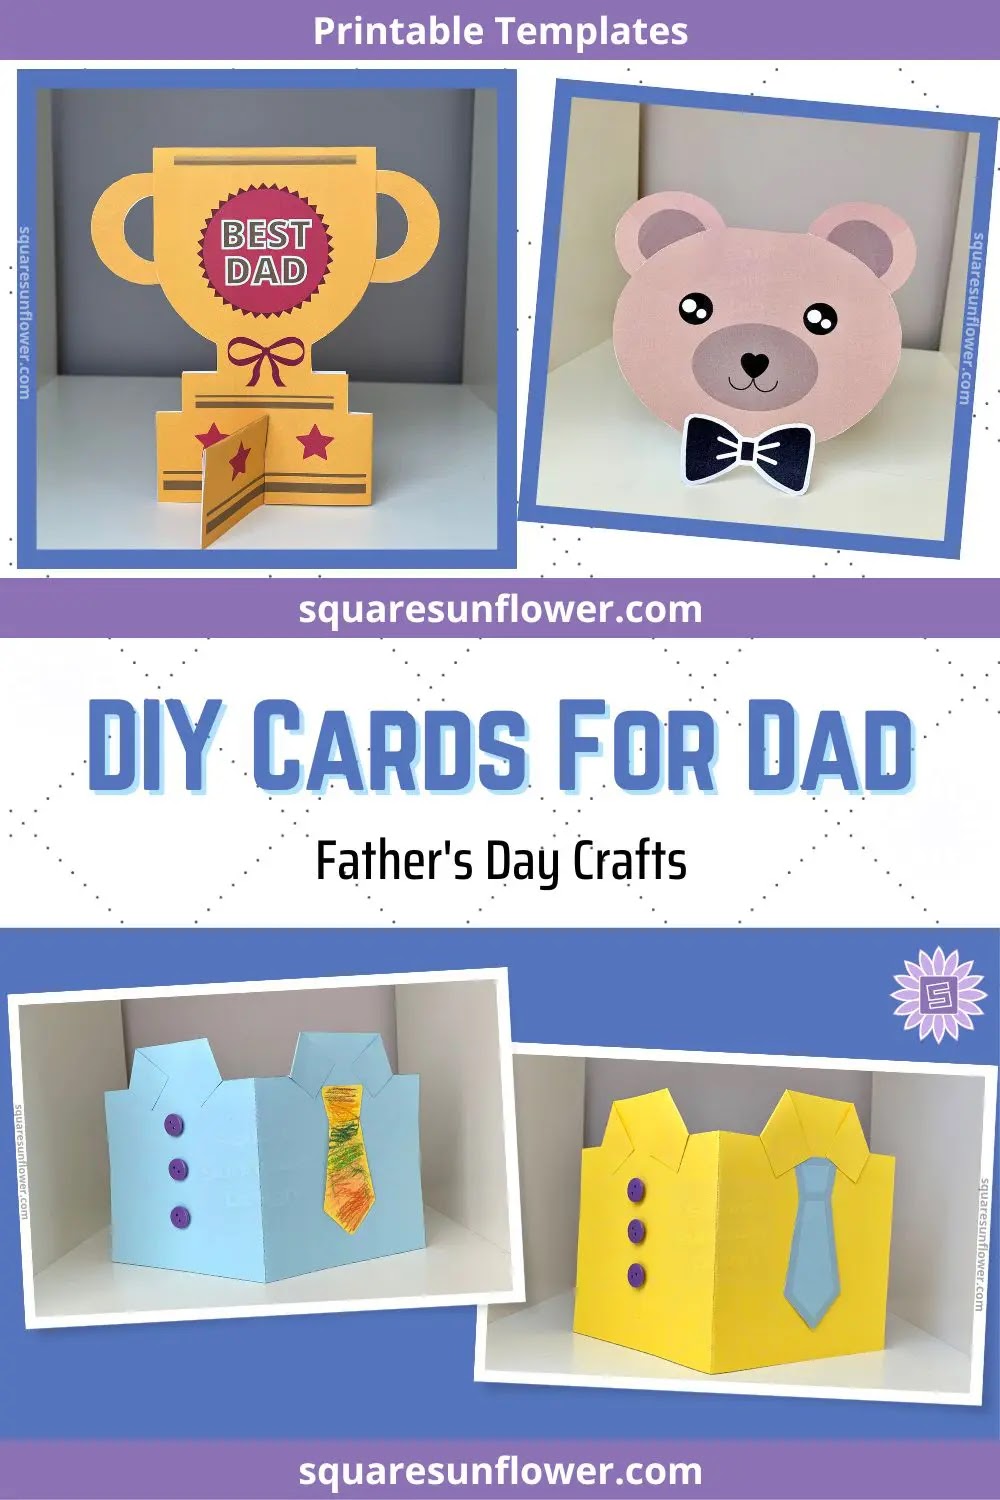 Homemade Father's Day Card Templates